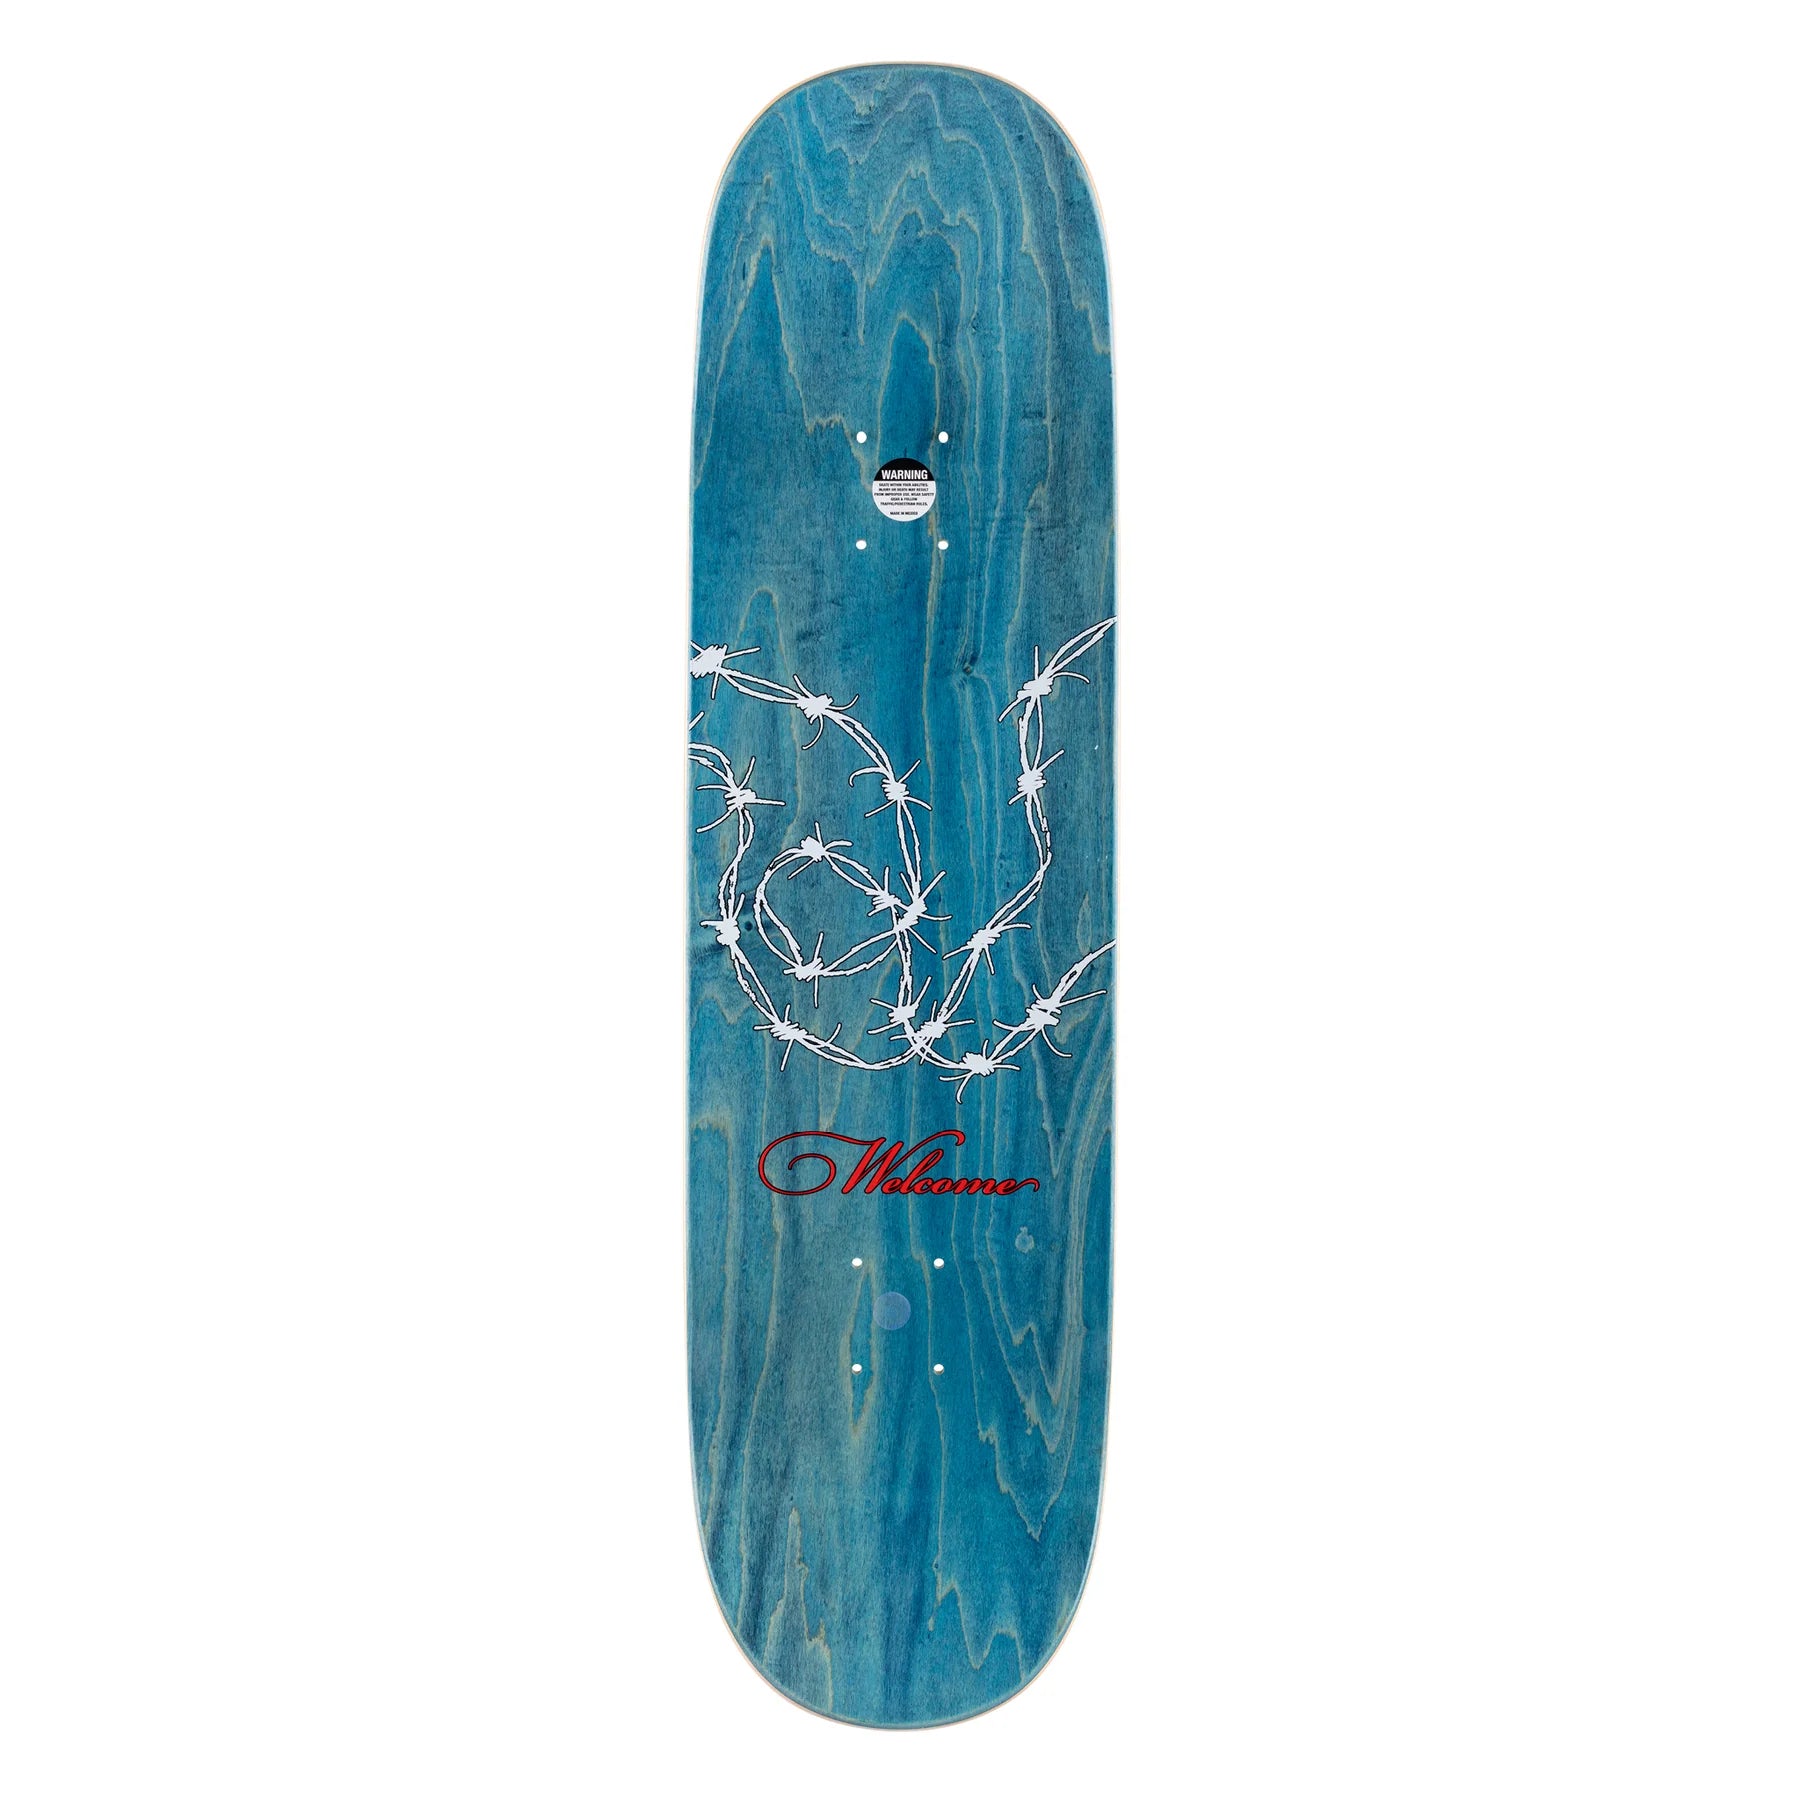 WELCOME RYAN TOWNLEY COWGIRL ON ENENRA - LIGHT BLUE/GOLD FOIL - 8.5&quot;